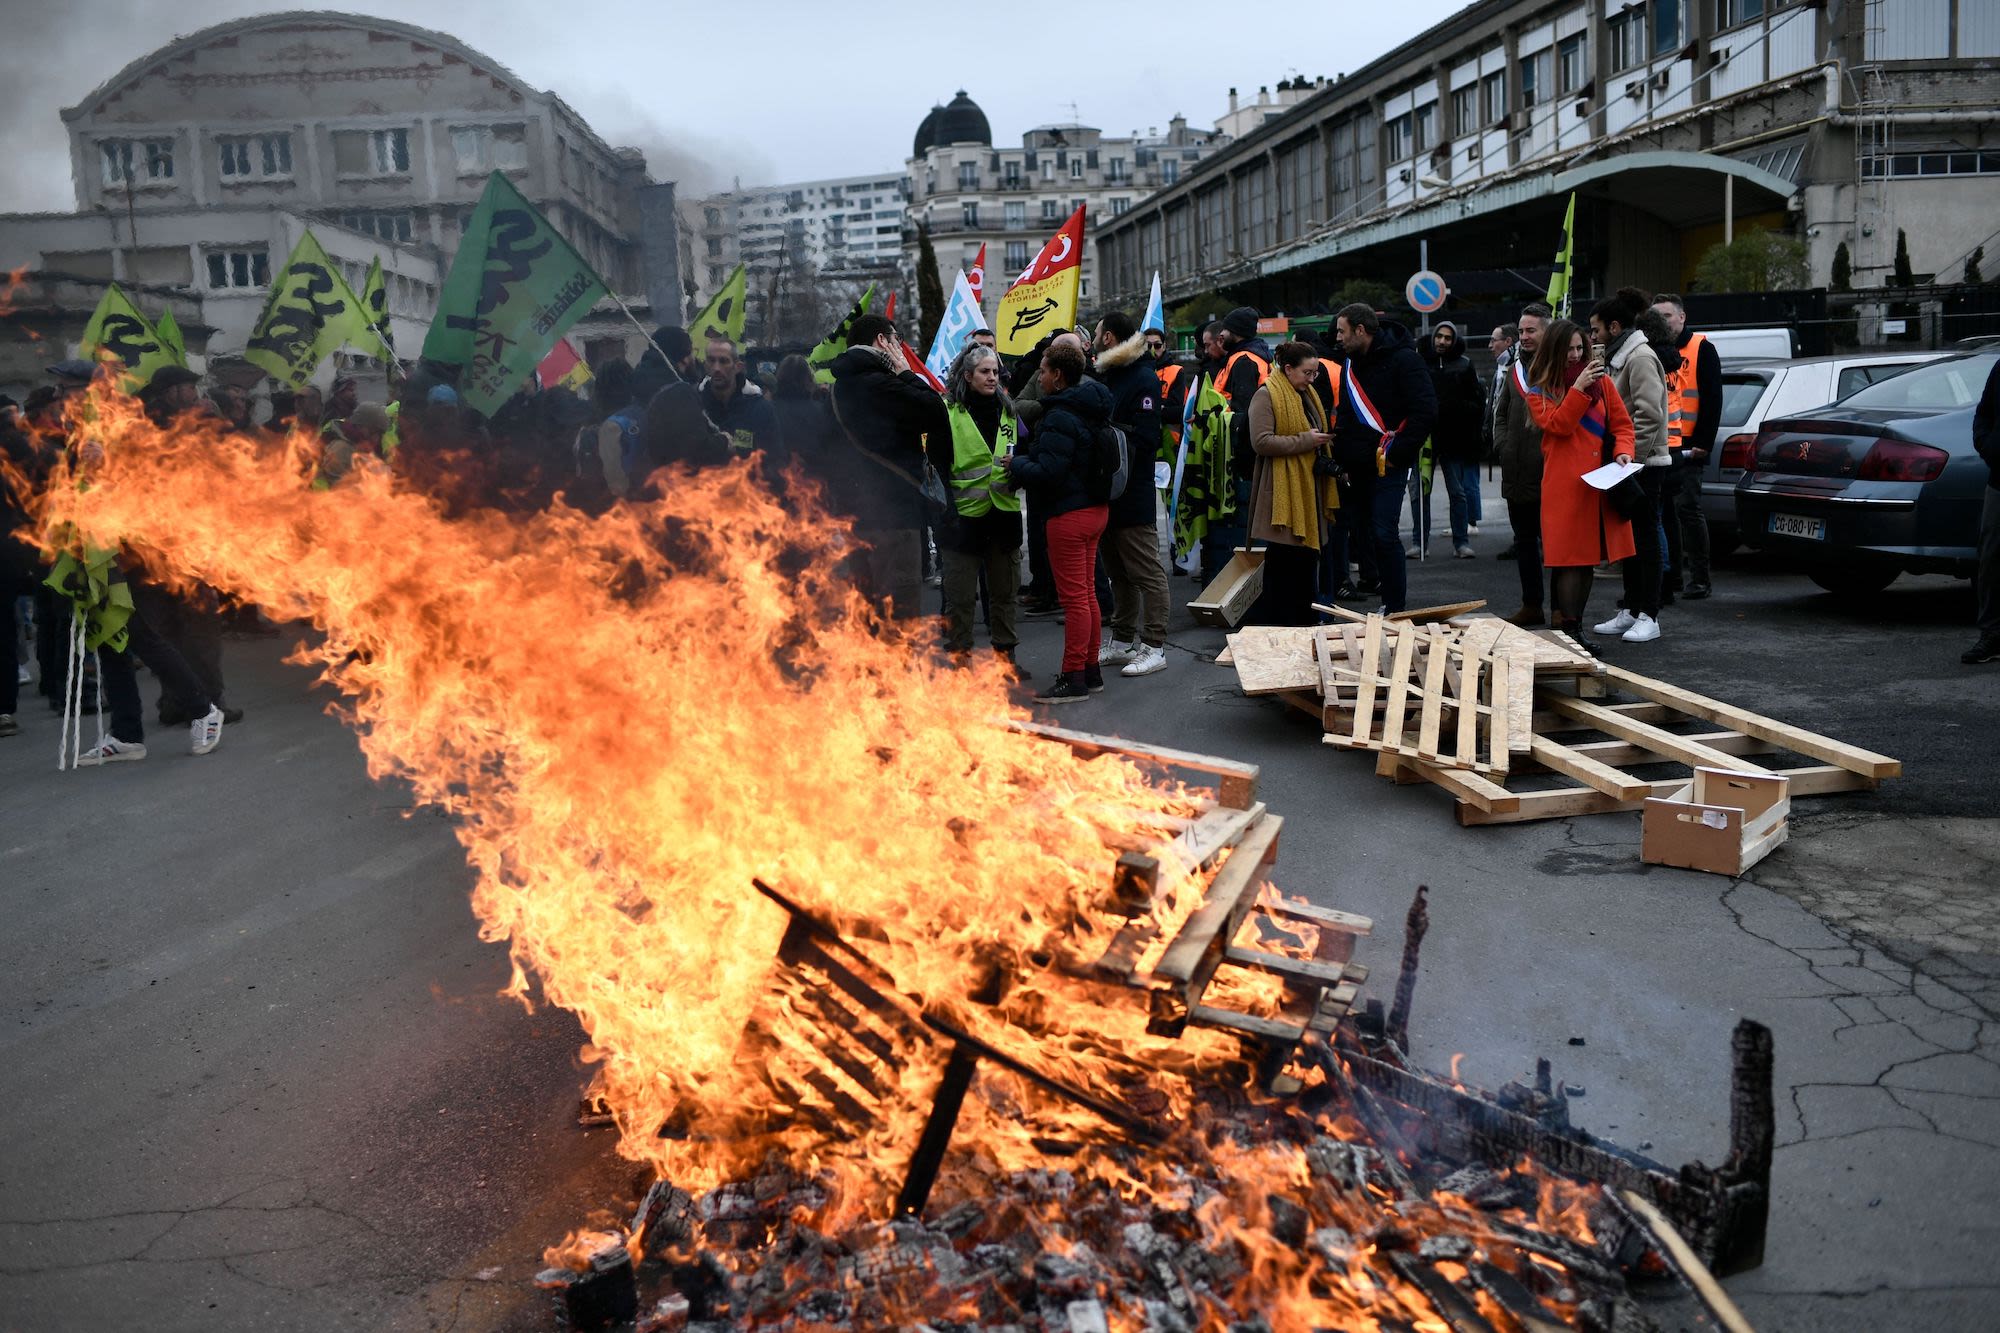 Strikes continue in France